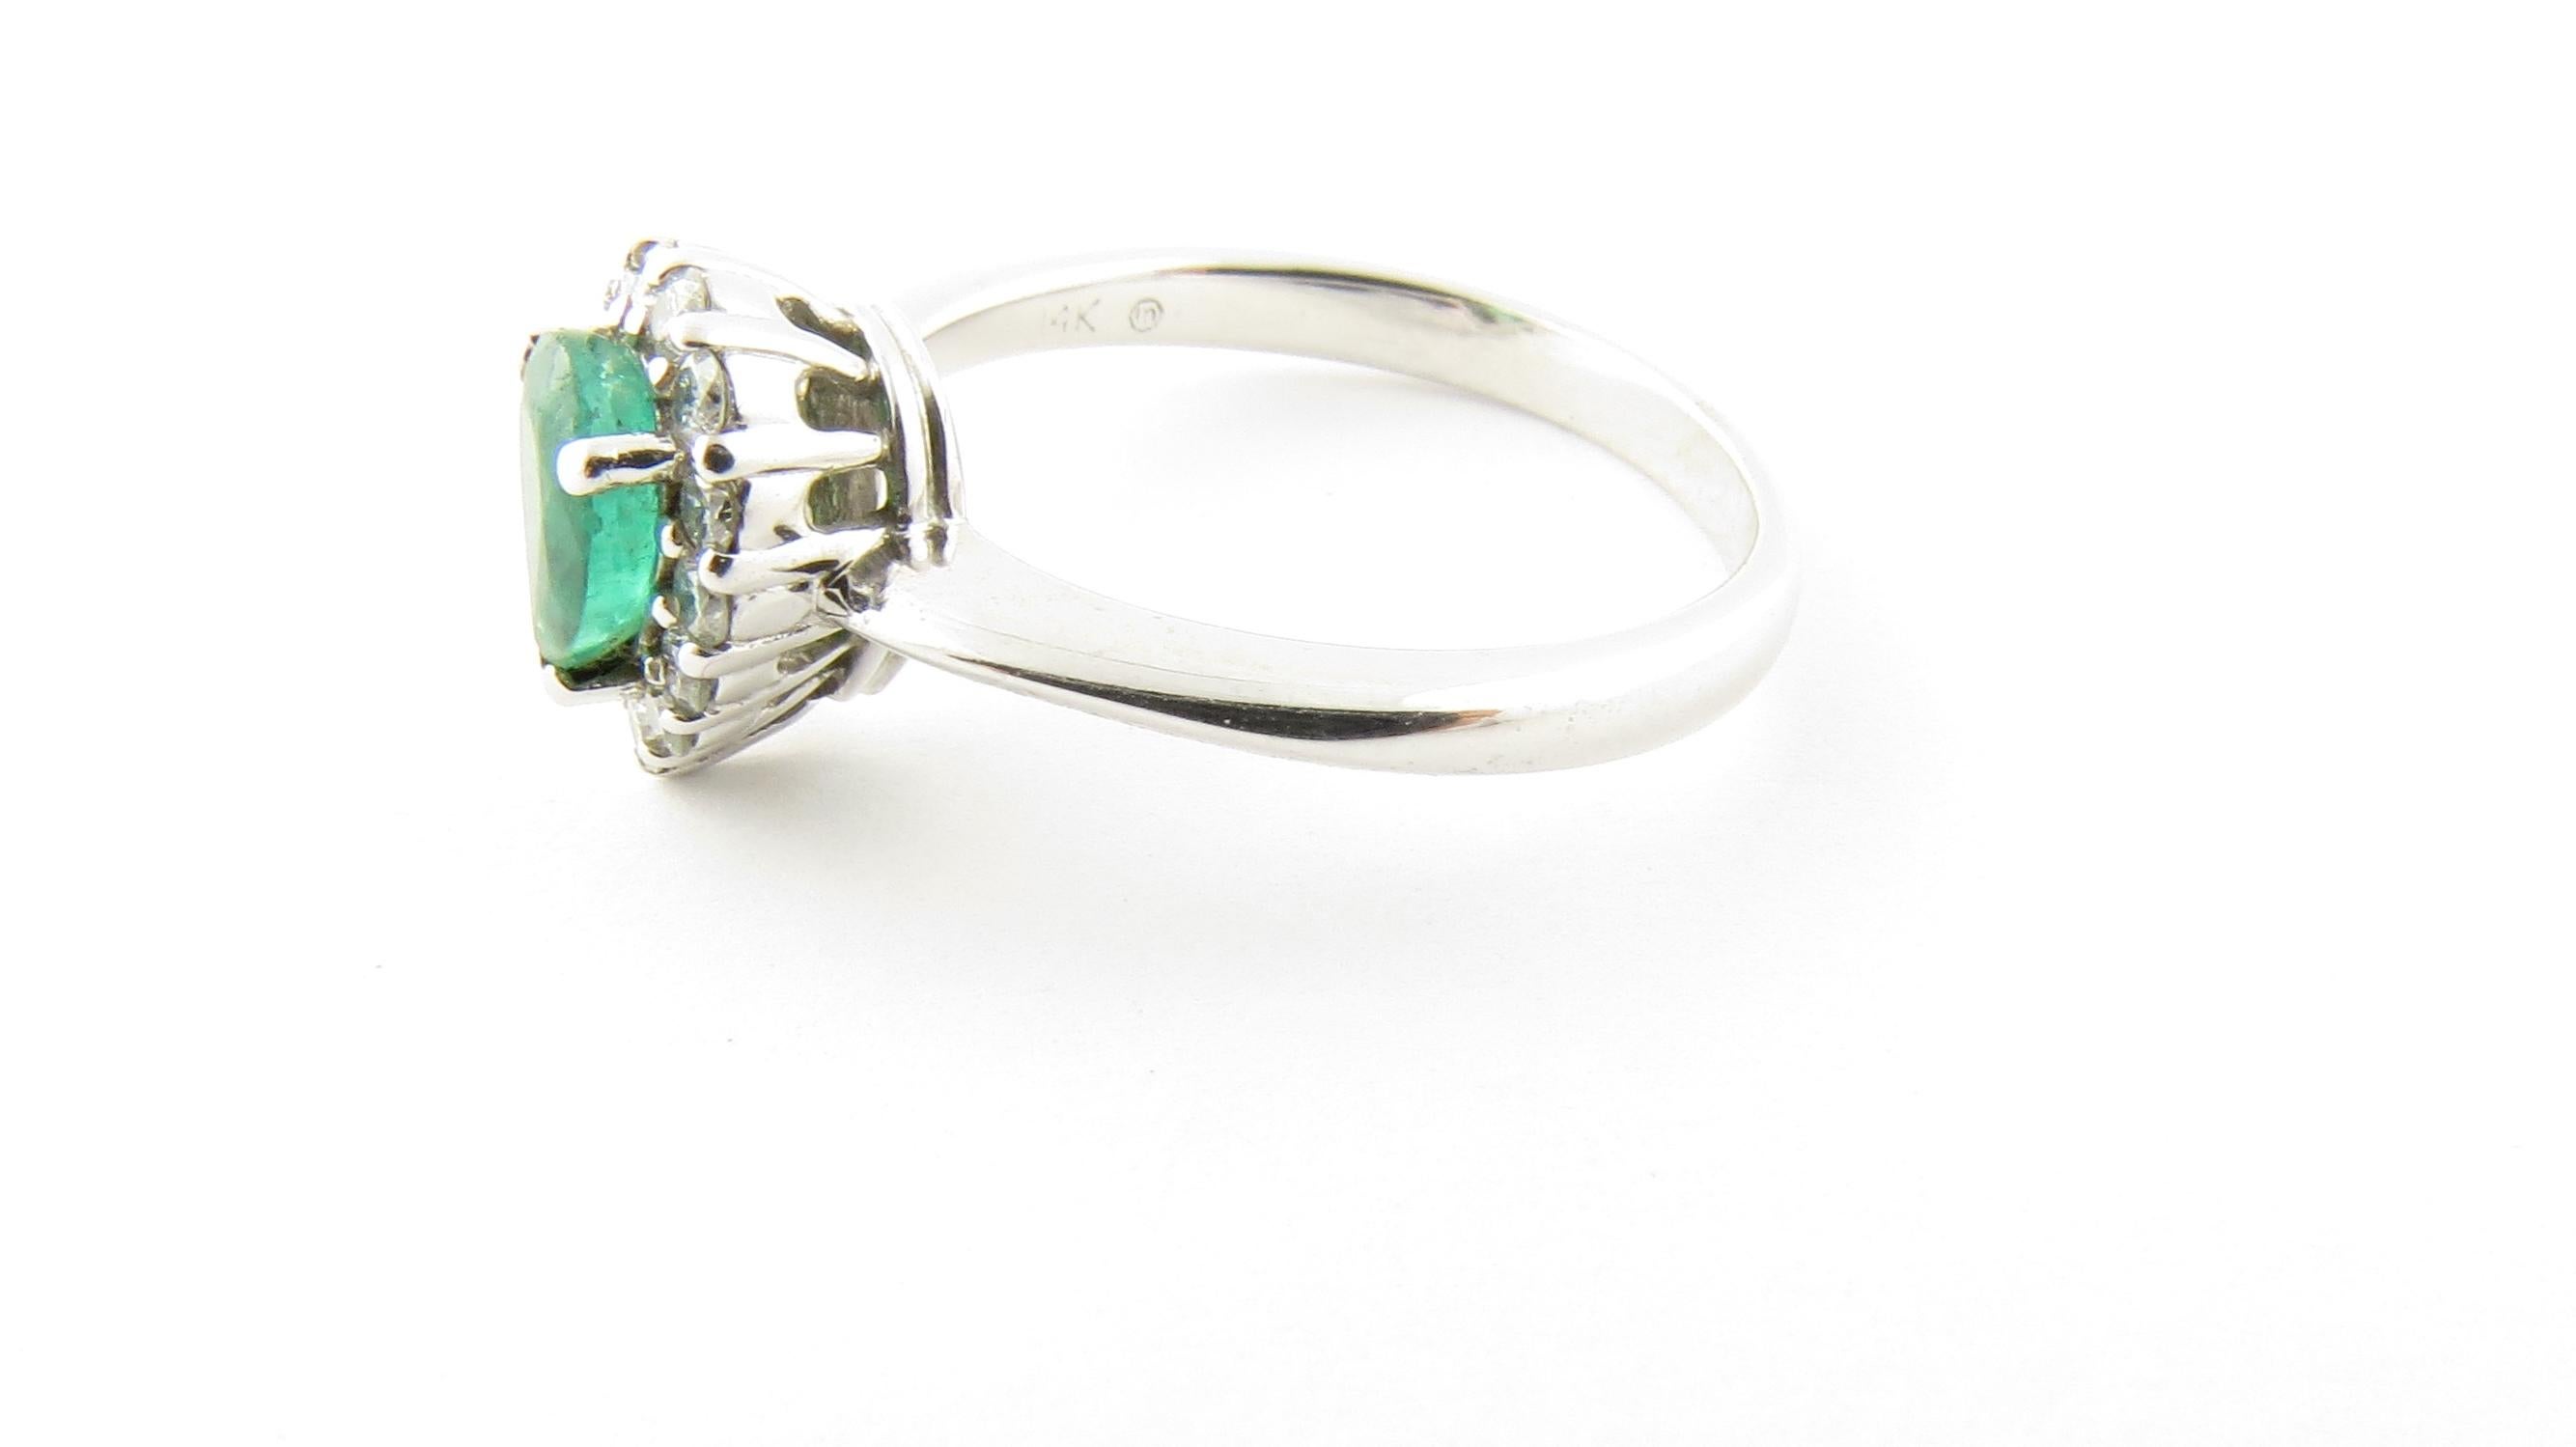 Vintage 14 Karat White Gold Emerald and Diamond Ring Size 7.25

This stunning ring features one pear-shaped genuine emerald (7 mm x 5 mm) surrounded by 13 round brilliant cut diamonds and set in classic 14K white gold. Shank measures 2 mm. 
*Emerald